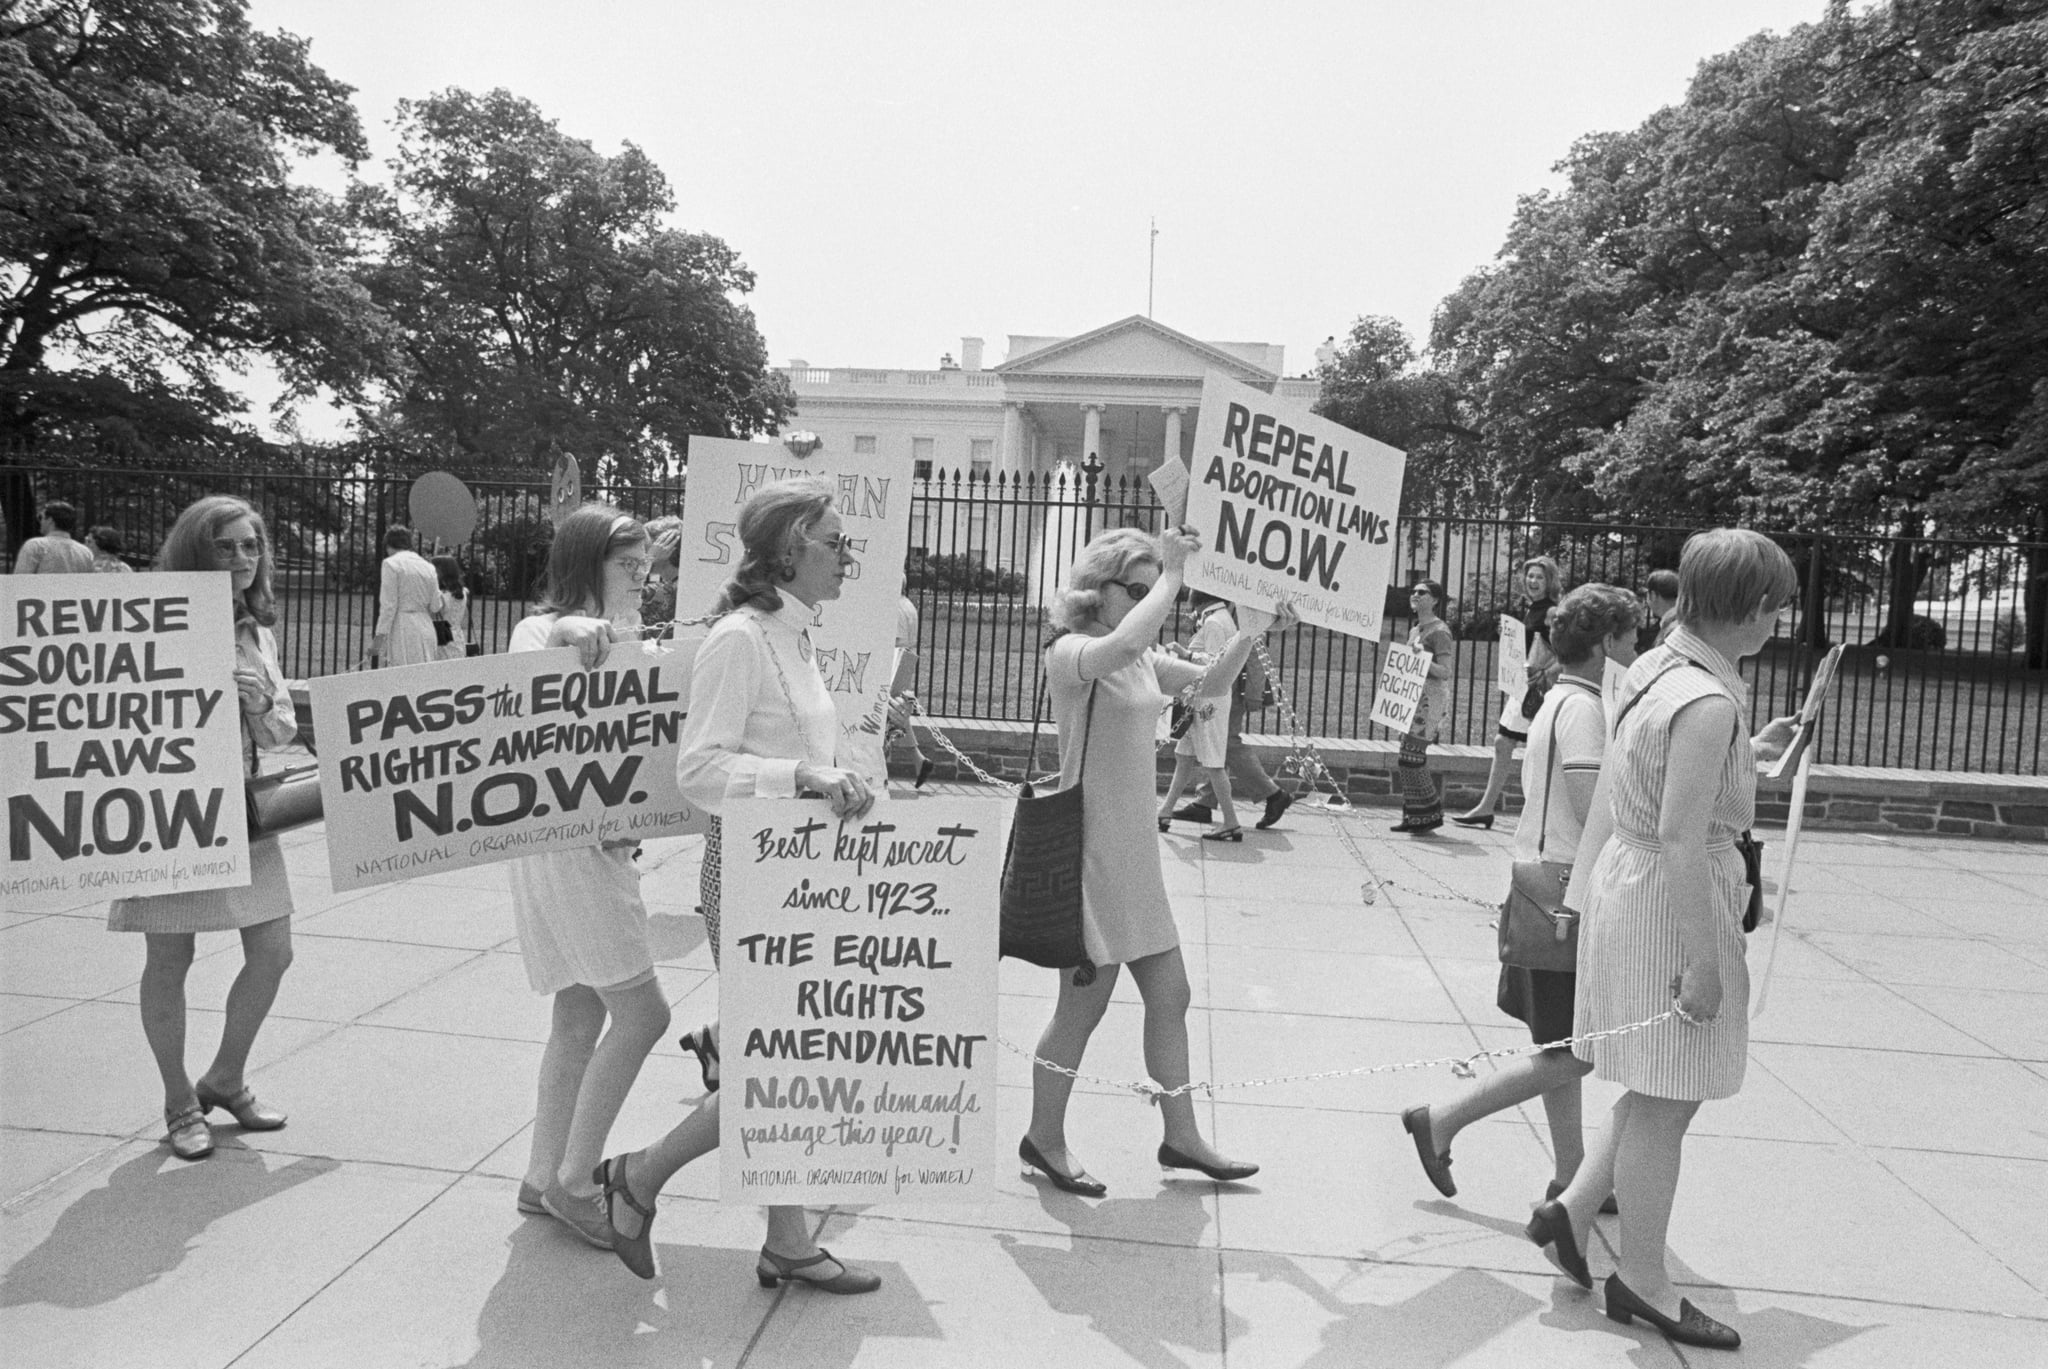 Members of the National Organisation for Women demonstrate outside the White House. They wear chains decorated with flowers, and are asking for passage of the Equal Rights Amendment.